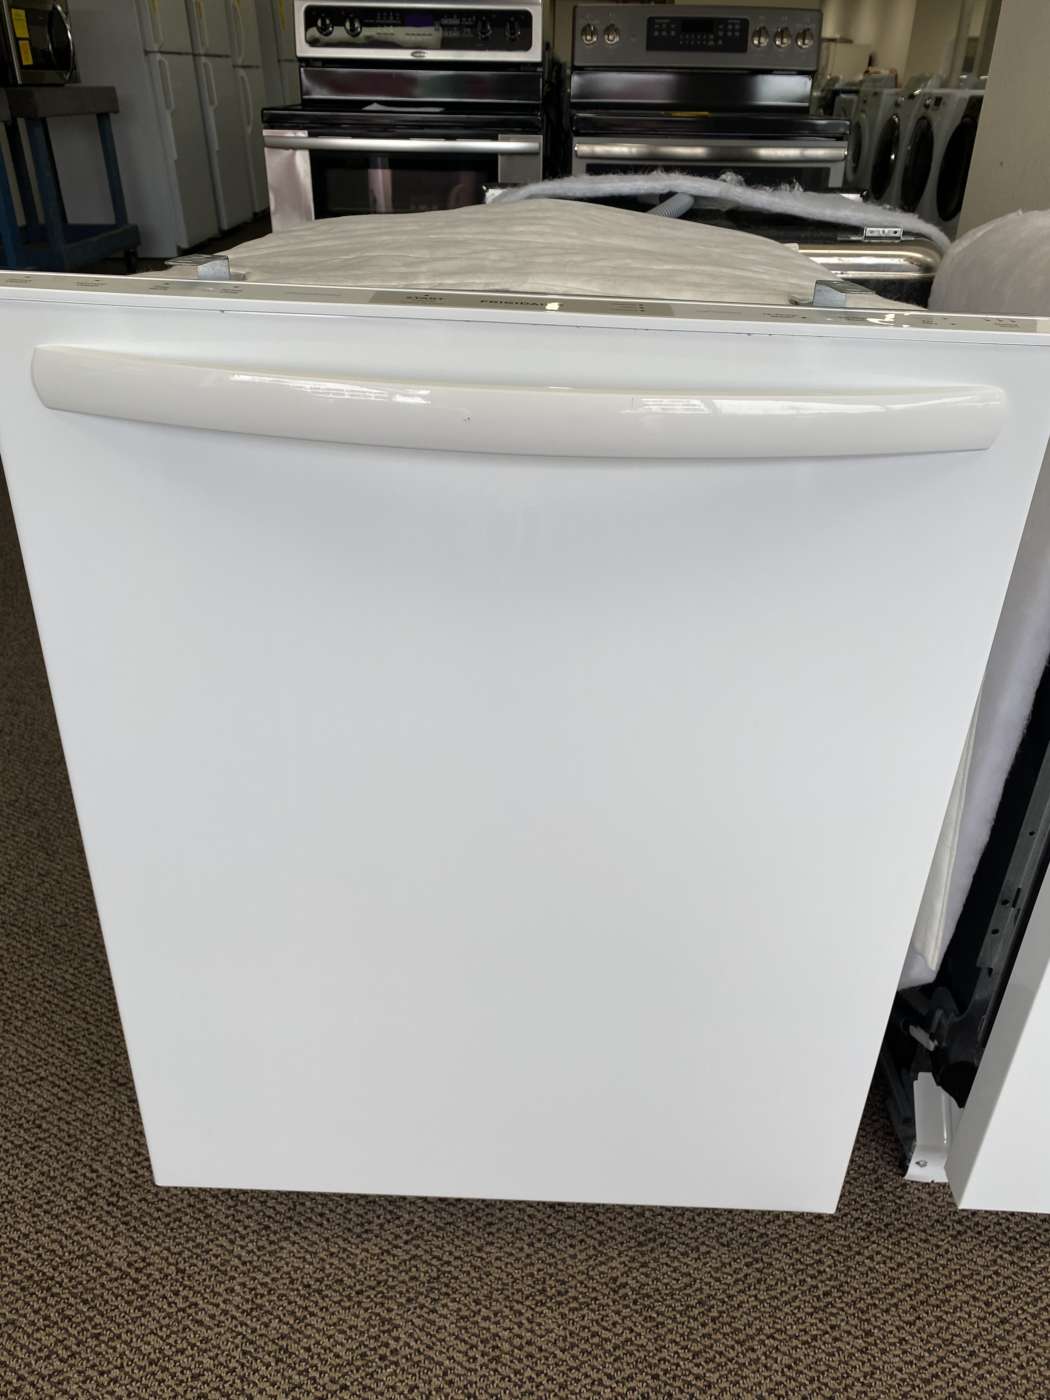 Reconditioned FRIGIDAIRE Poly-Tub Built-In Dishwasher – White